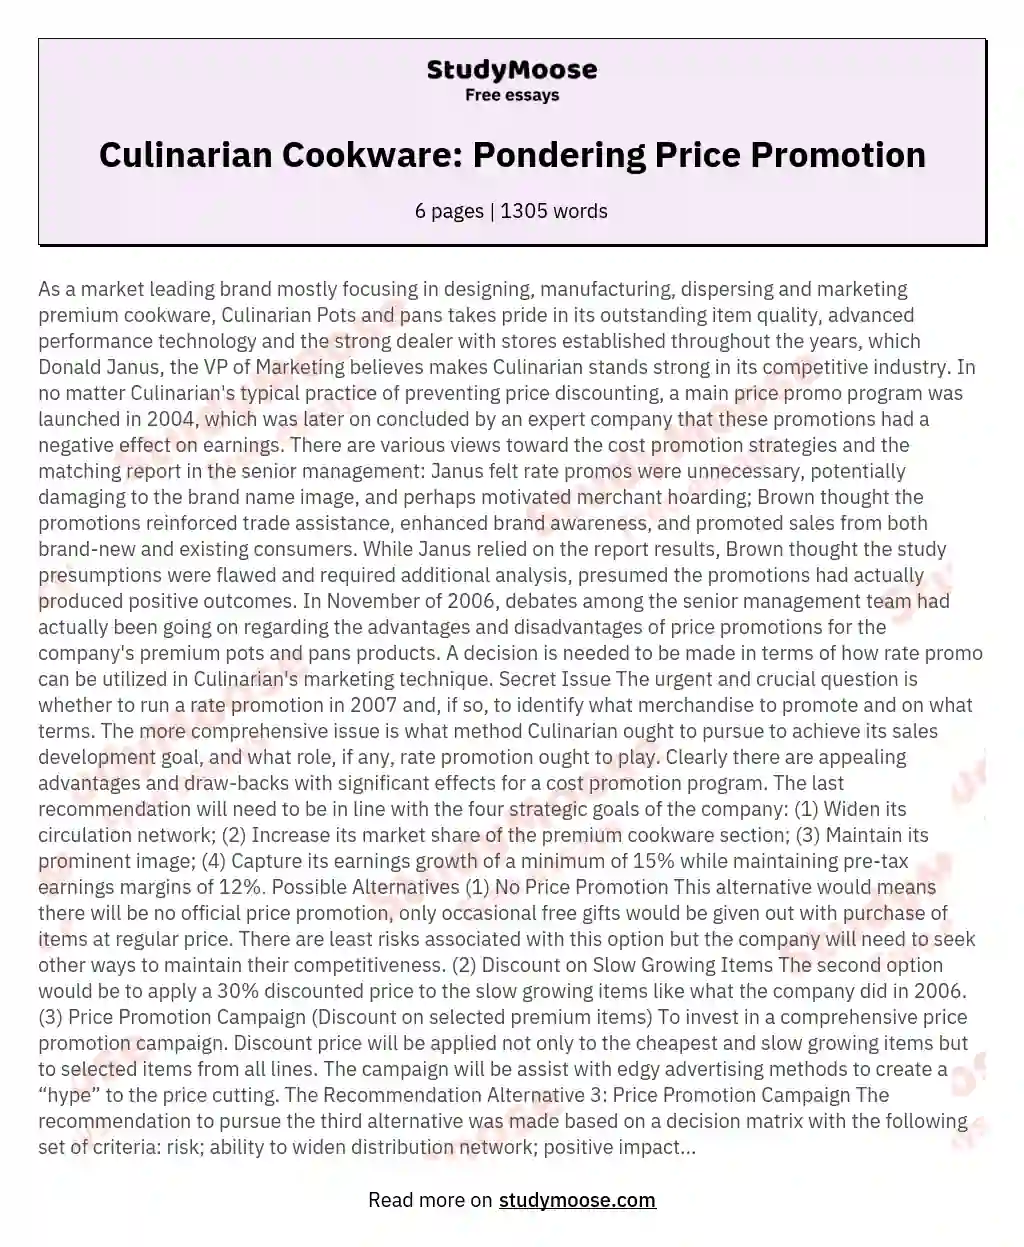 Culinarian Cookware: Pondering Price Promotion